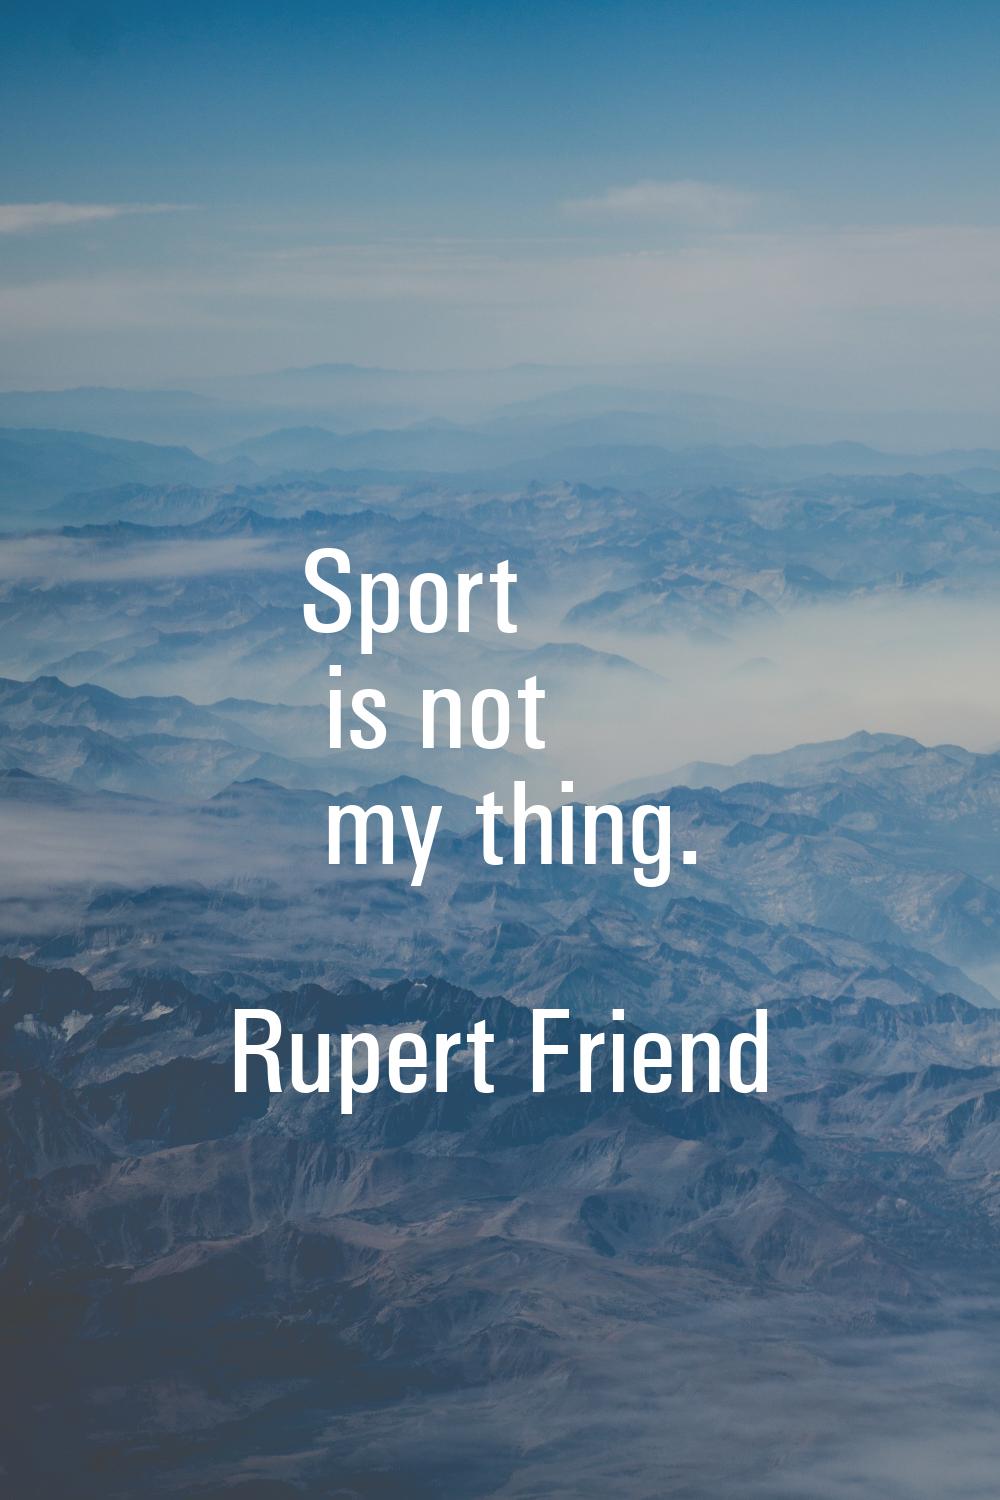 Sport is not my thing.